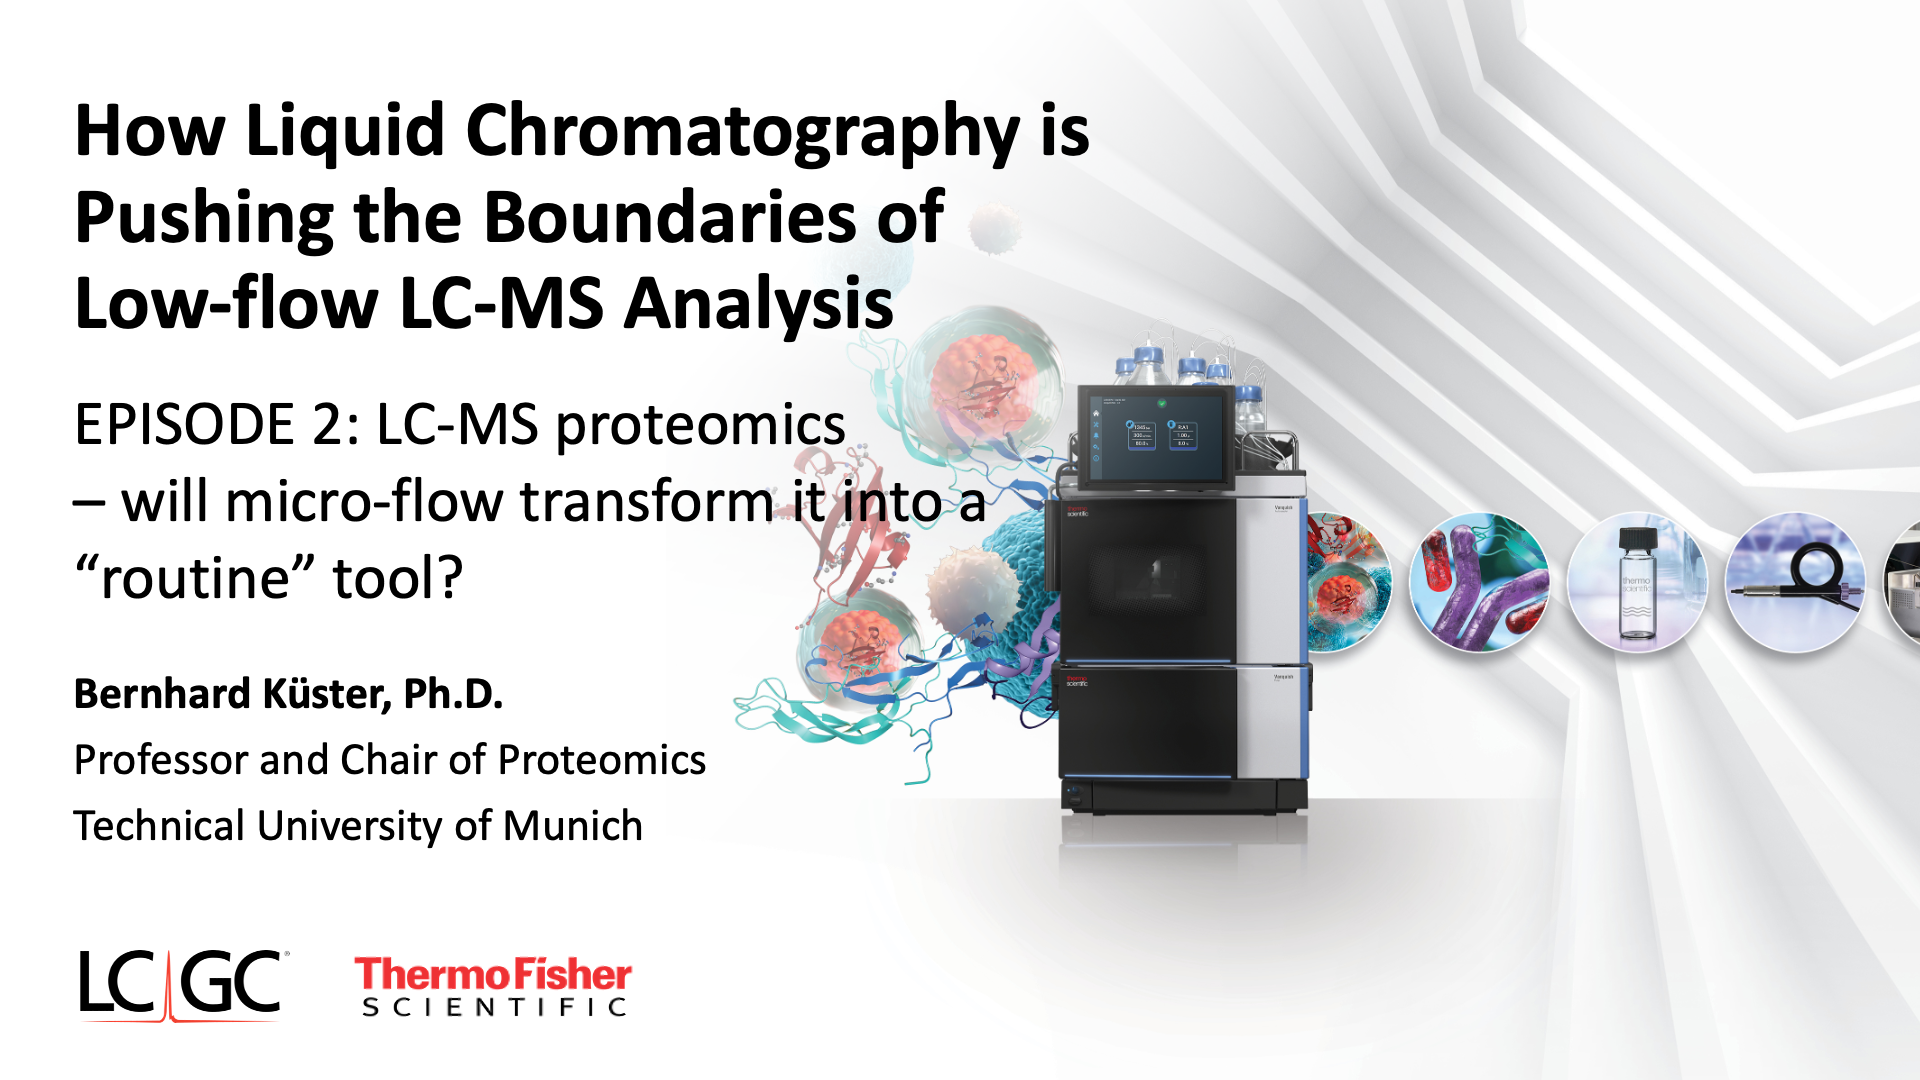 LC-MS proteomics- will micro-flow transform it into a "routine" tool?